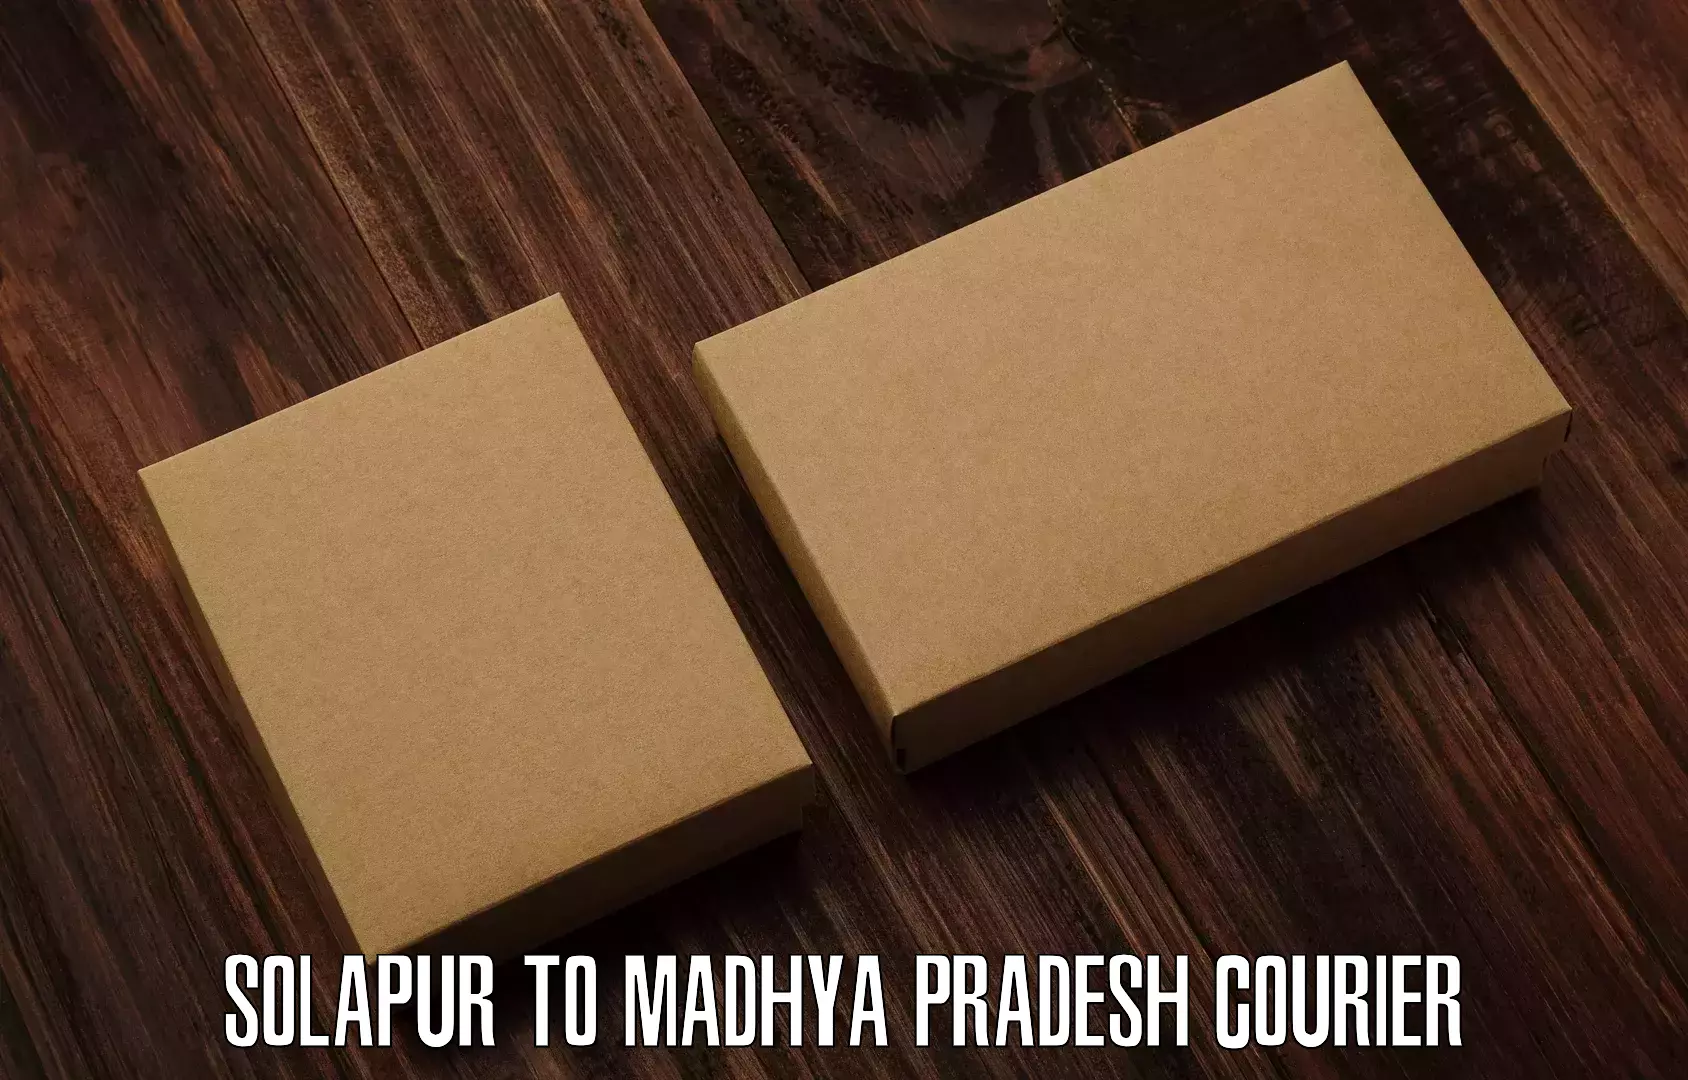 User-friendly delivery service Solapur to Indore